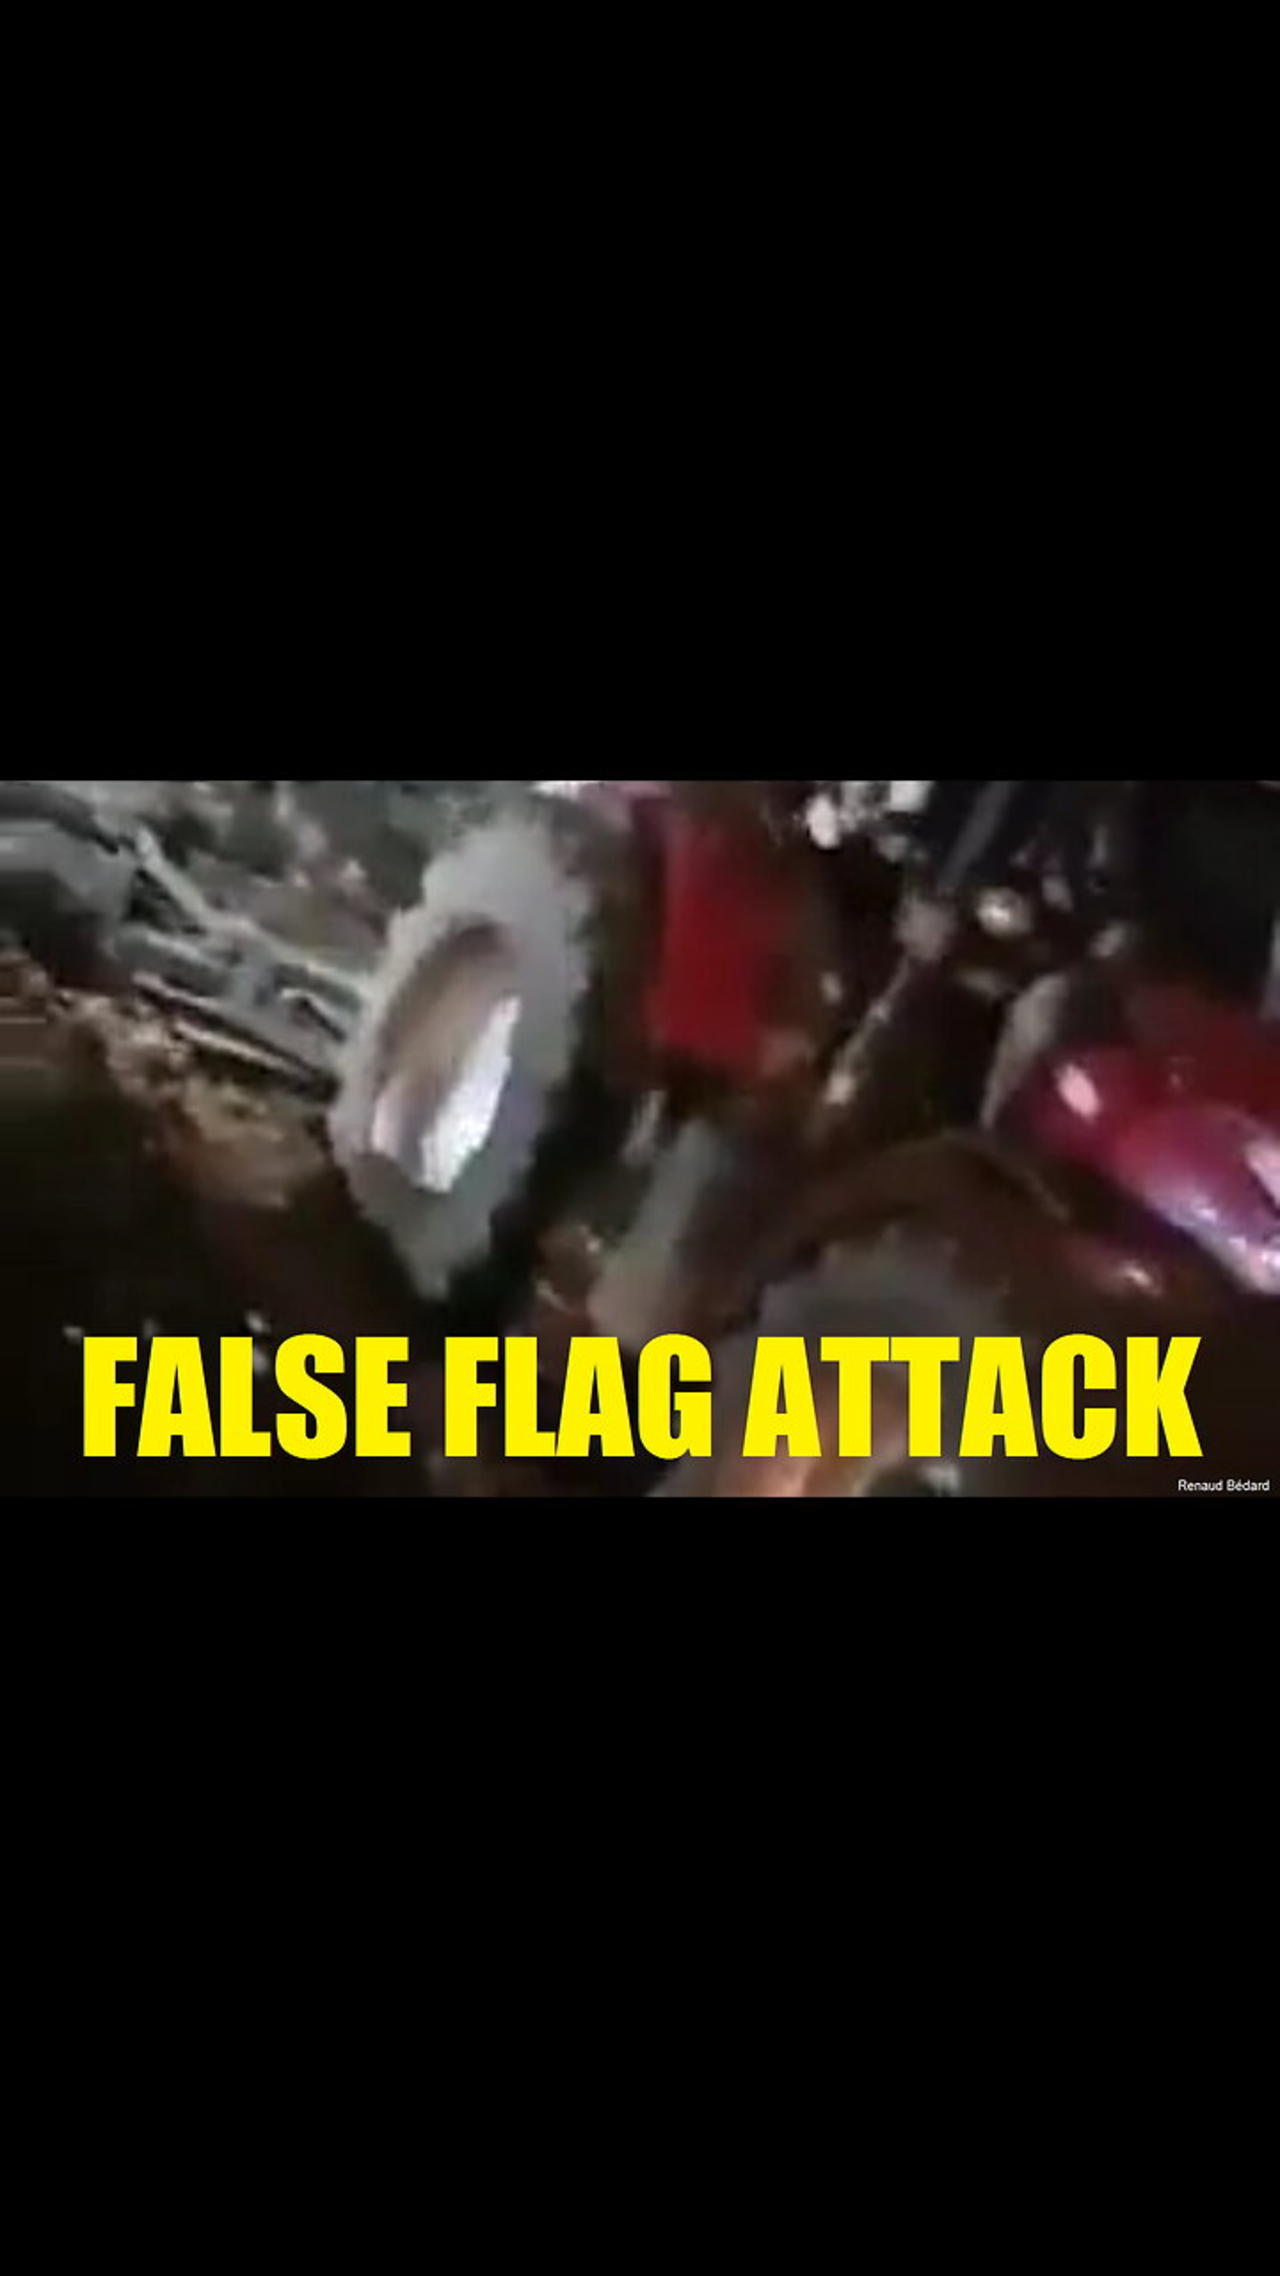 THE TWO RUSSIAN MISSILES HITTING POLISH TERRITORY BS IS FAKE NEWS FALSE FLAG